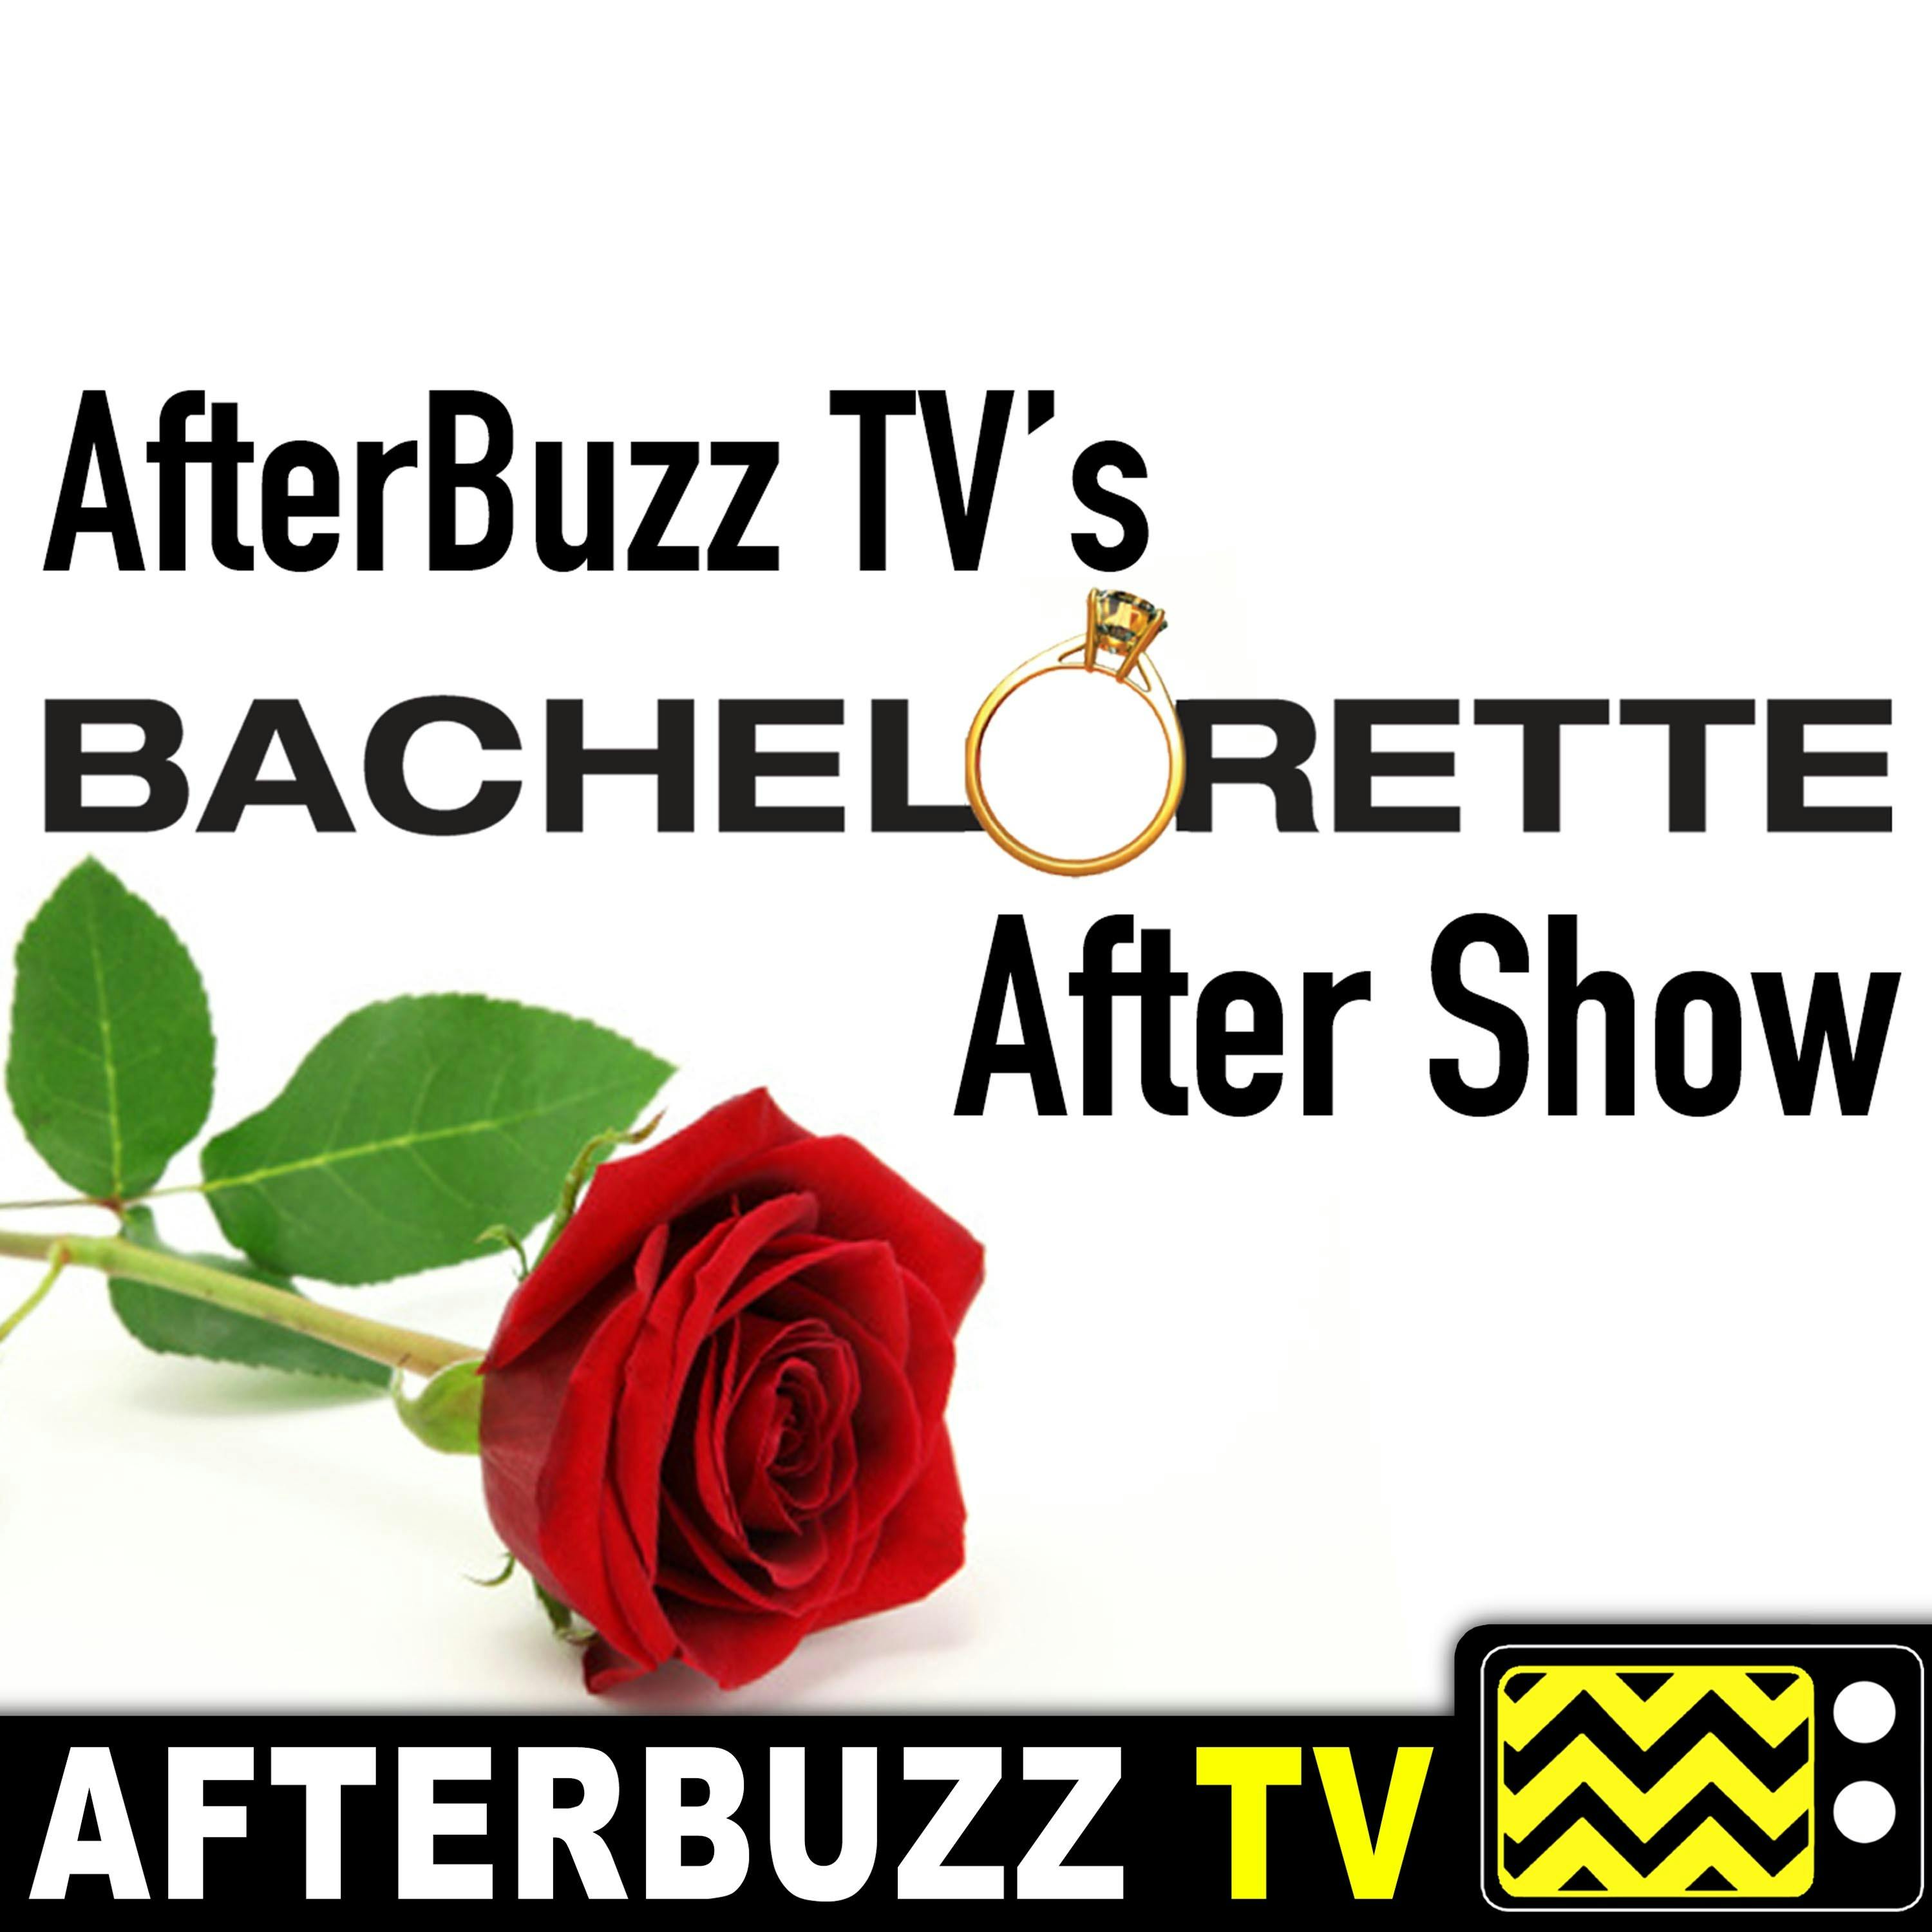 The Bachelorette | Interview with Daniel Maguire | AfterBuzz TV AfterShow